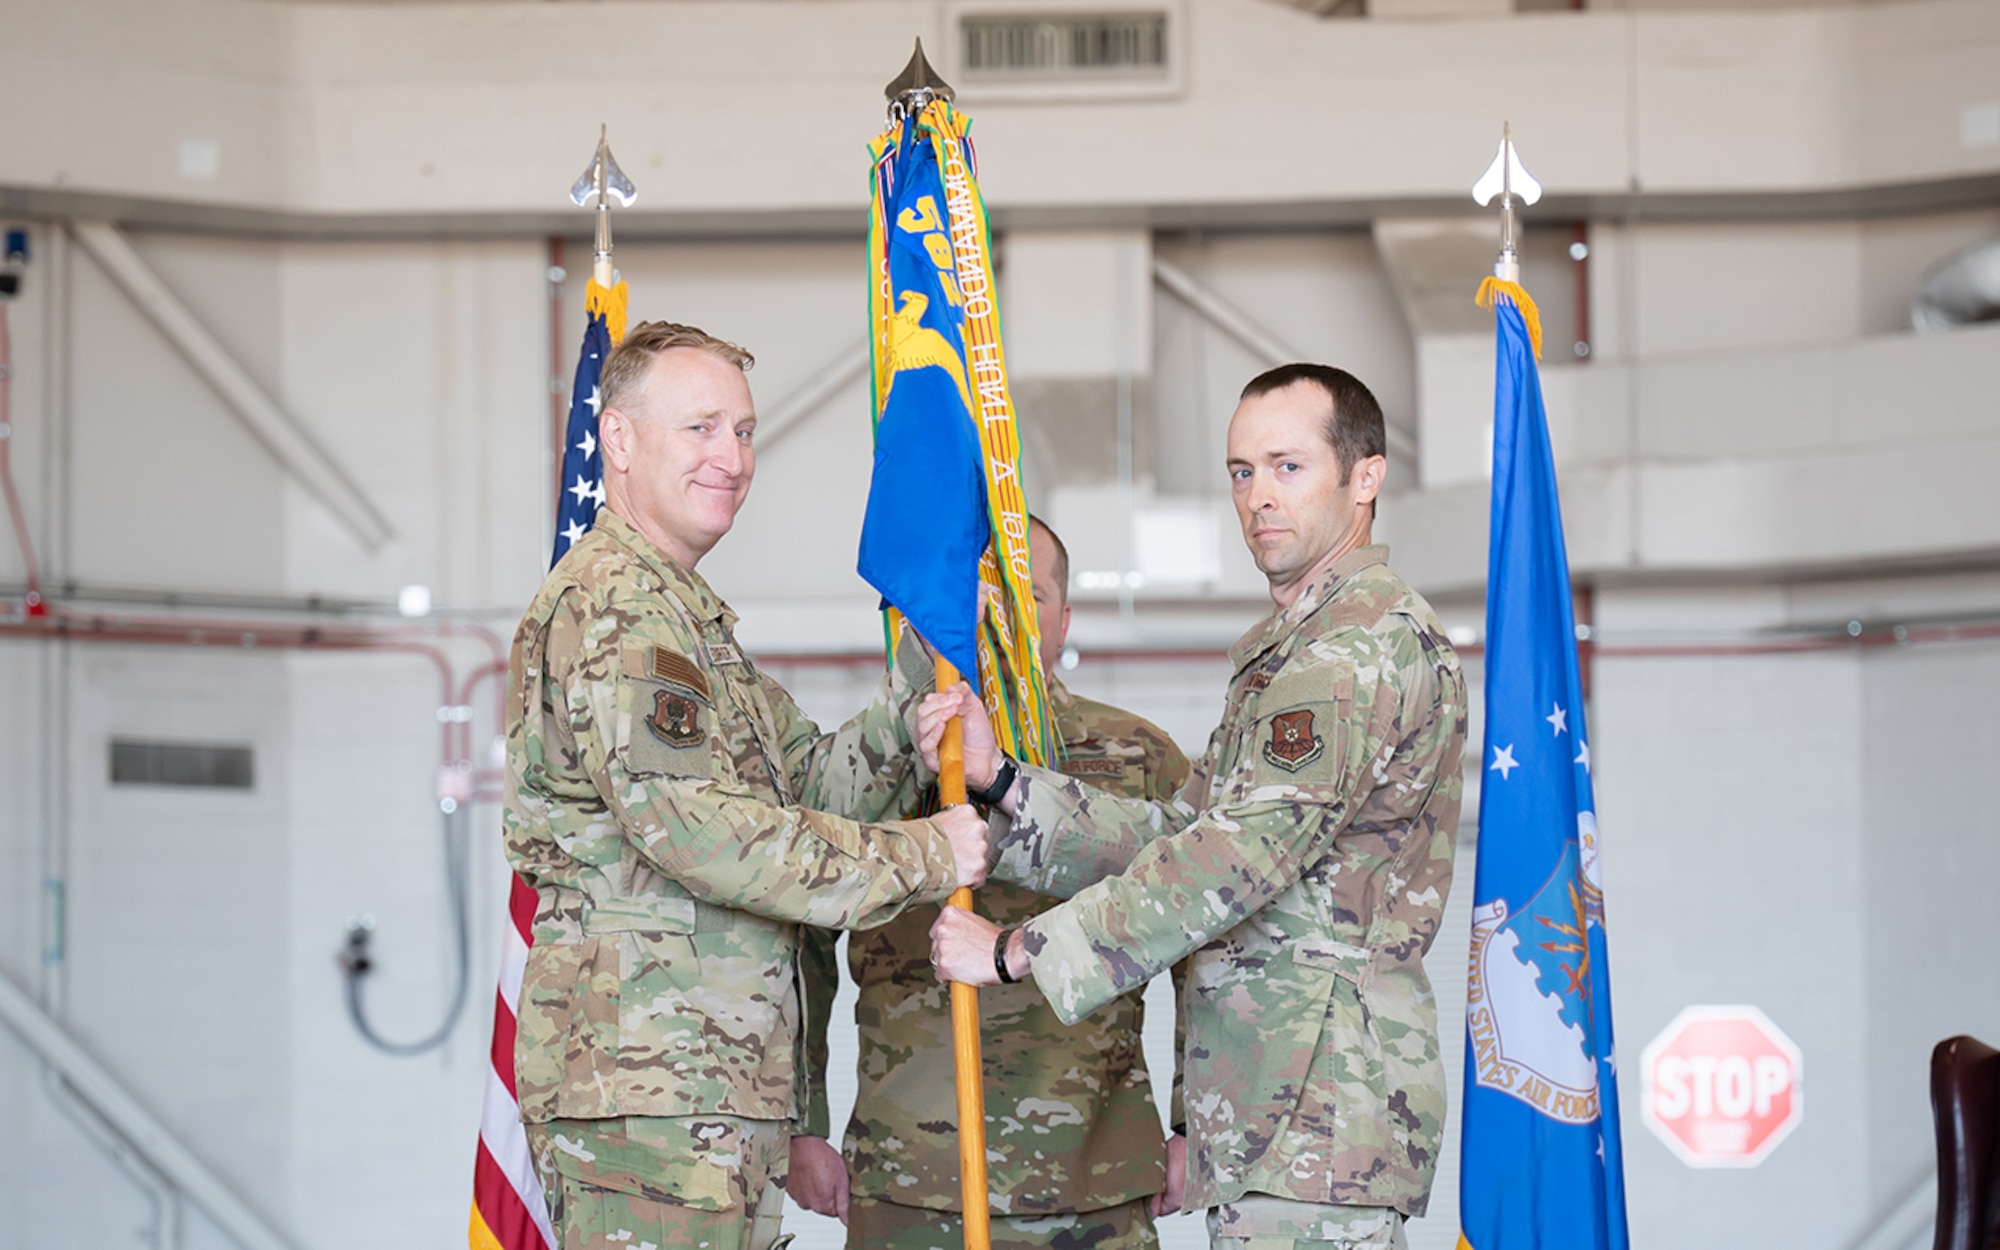 Lt. Col. Kenneth Green, right, accepts command of the 40th Helicopter Squadron from Col. John Beurer, left, 582nd Helicopter Group commander, during a change of command ceremony June 30, 2022, at Malmstrom Air Force Base, Mont.